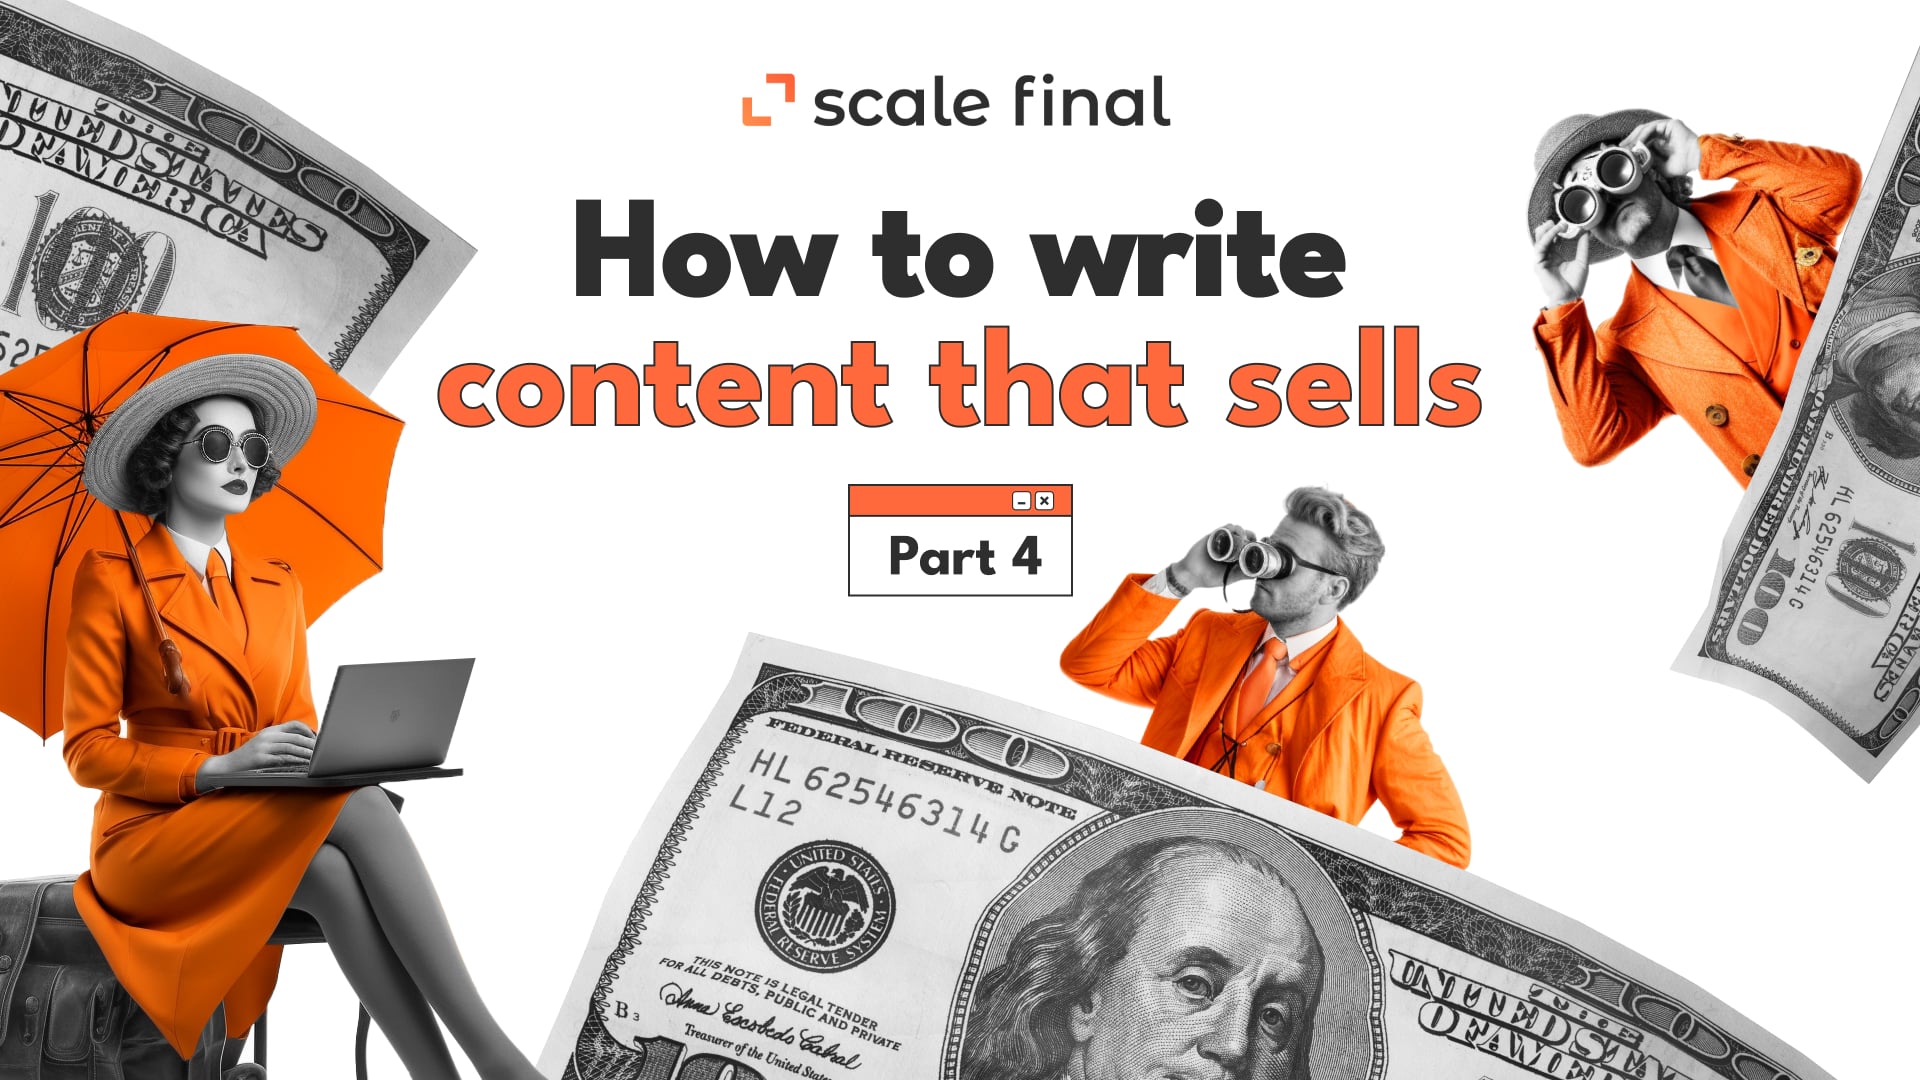 How to write content that sells Part 4